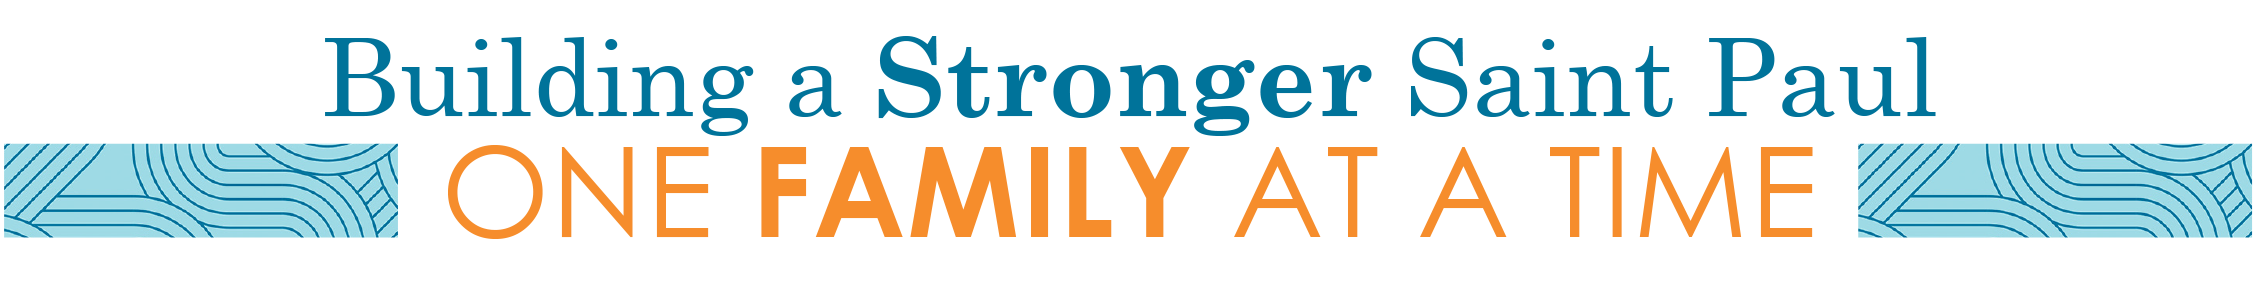 Building a stronger Saint Paul, one family at a time